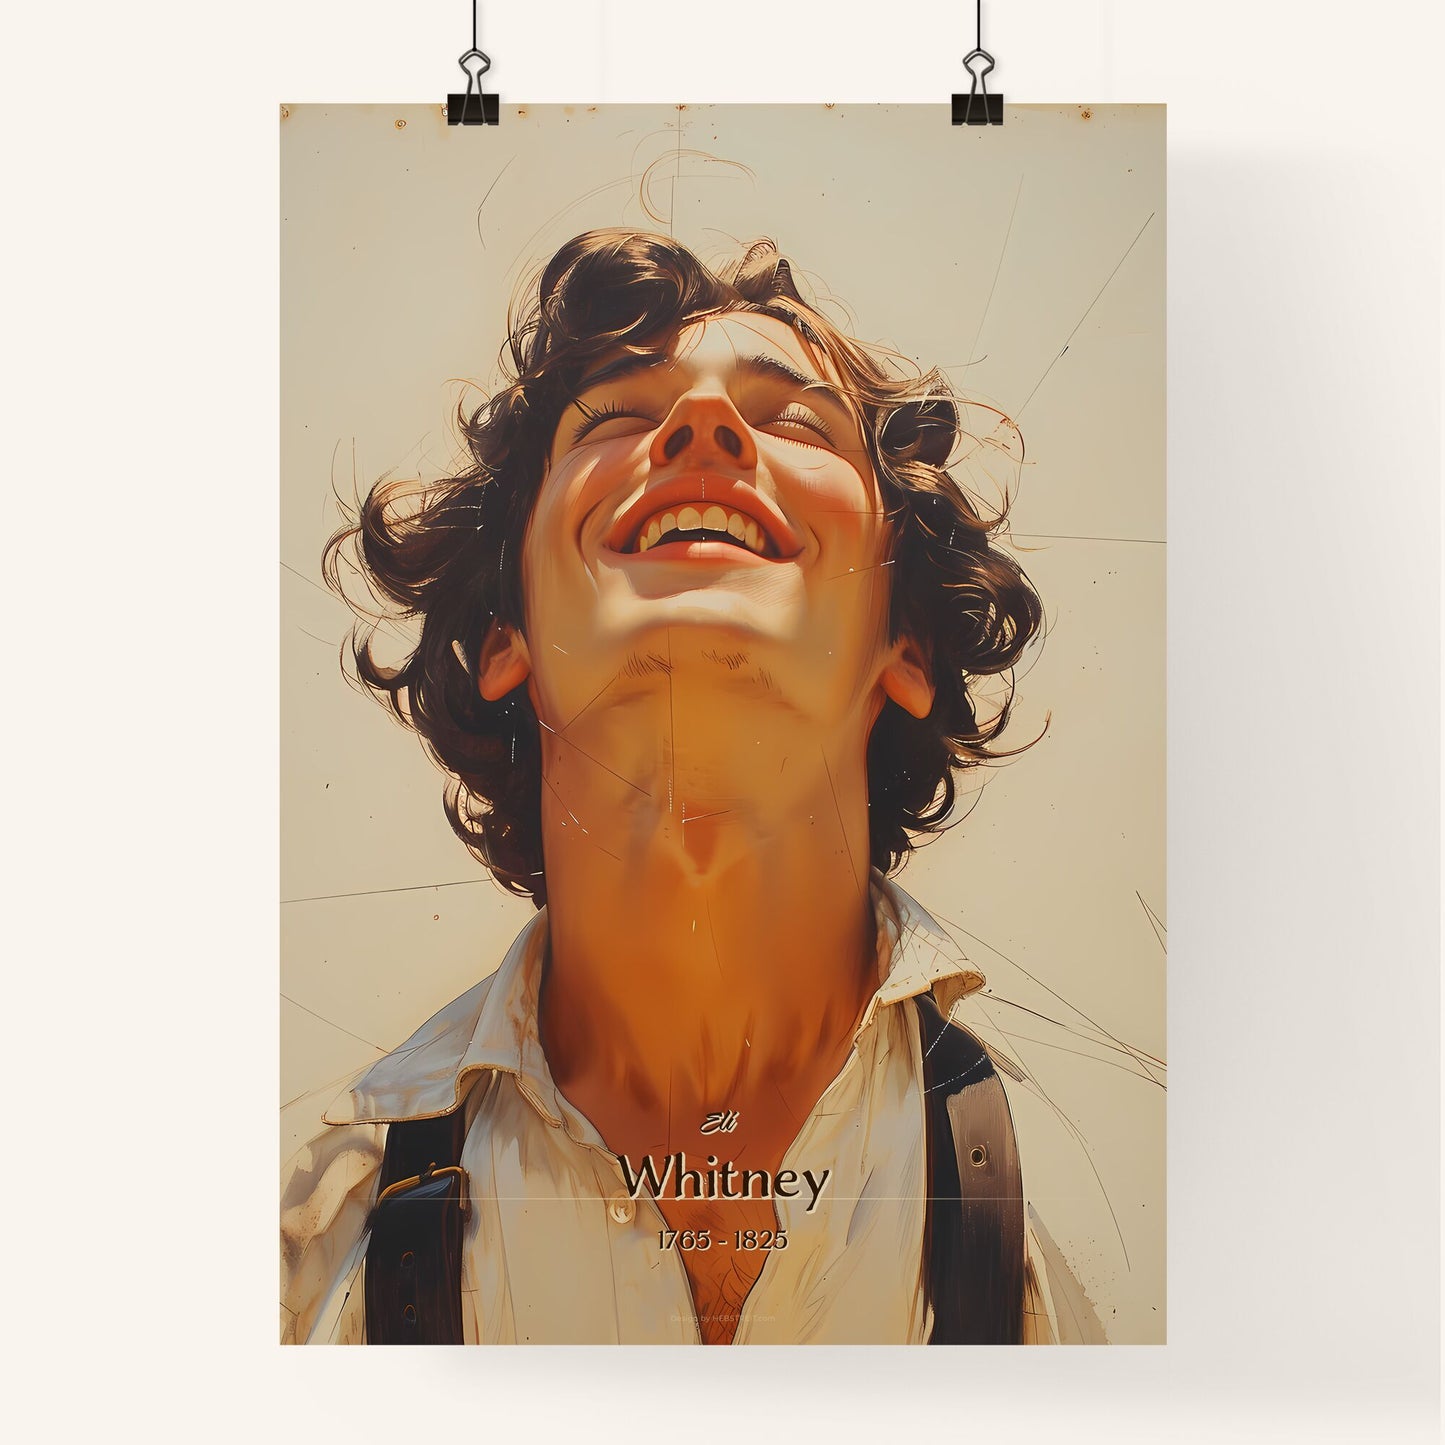 Eli, Whitney, 1765 - 1825, A Poster of a man smiling with his eyes closed Default Title